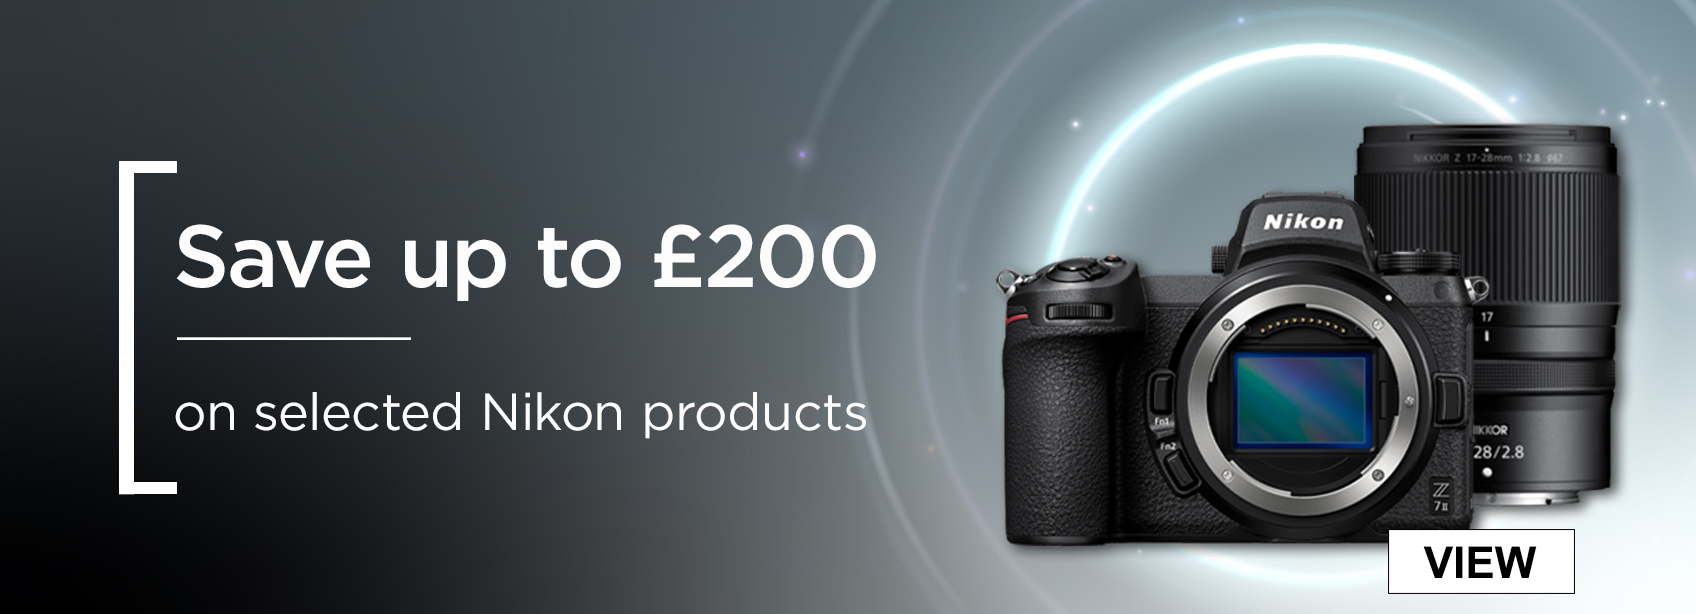 Save up to £200 on selected Nikon products 